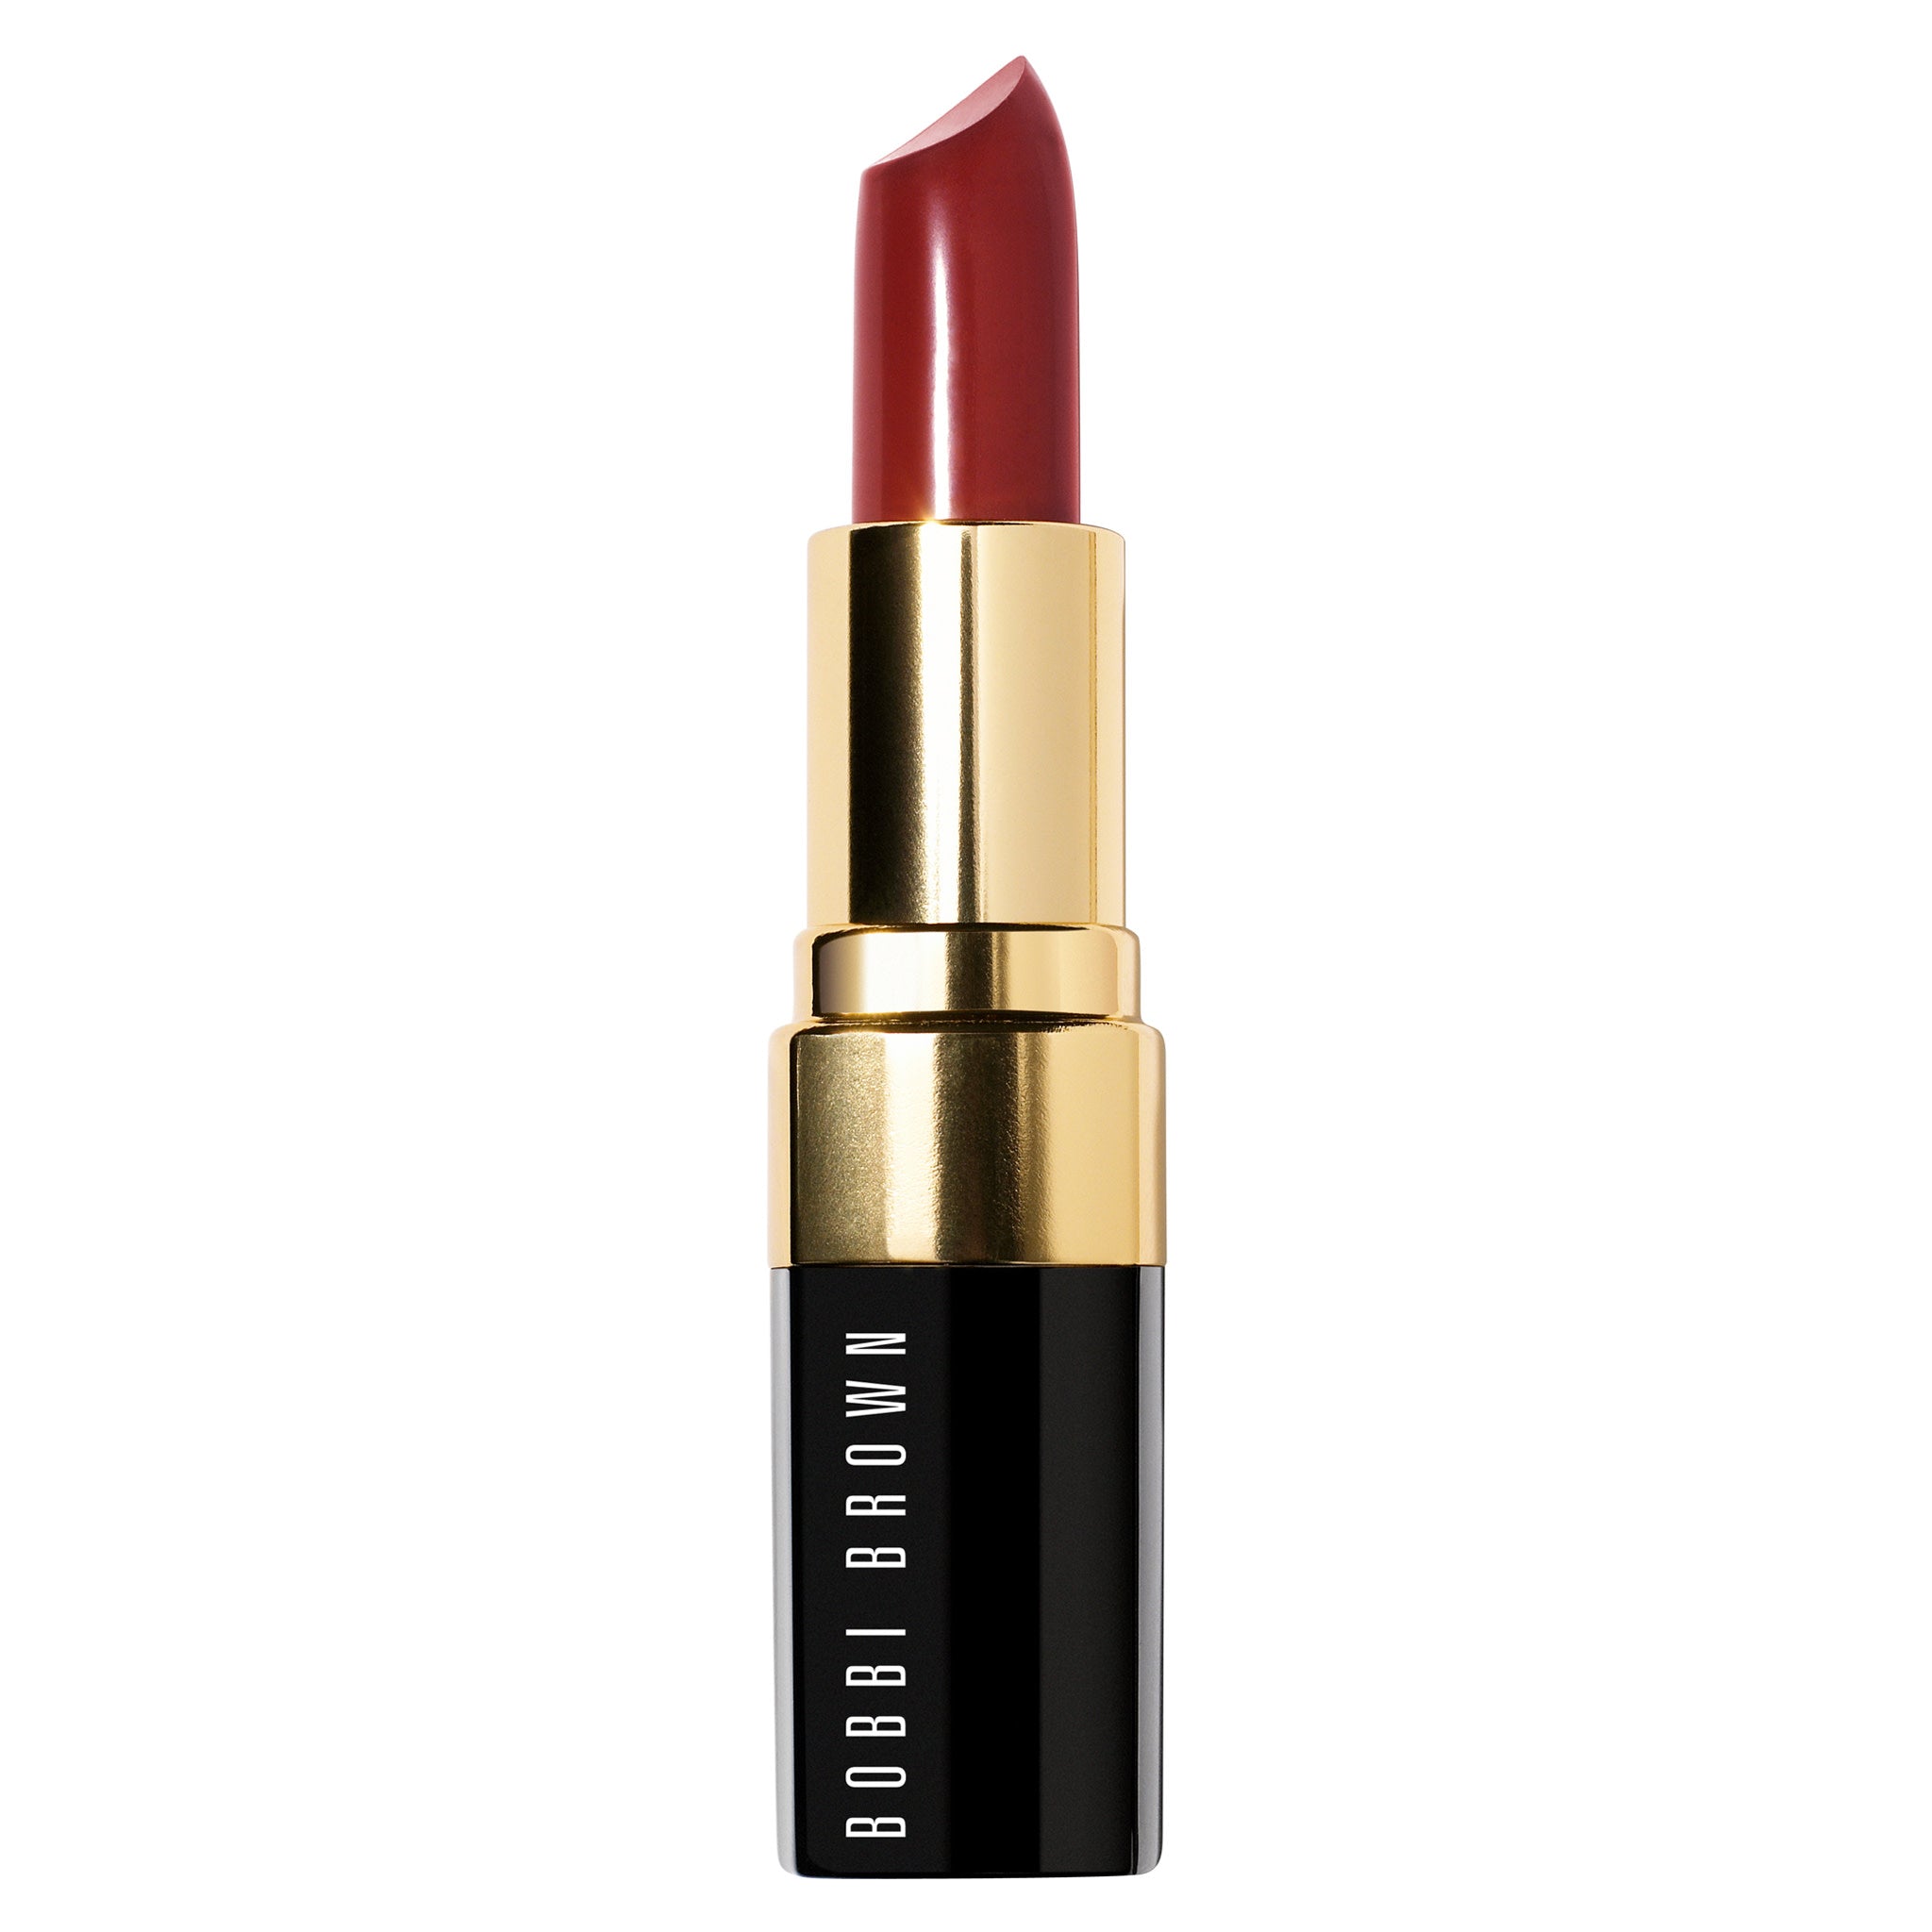 Bobbi Brown Lip Color Color/Shade variant: Red main image. This product is in the color red